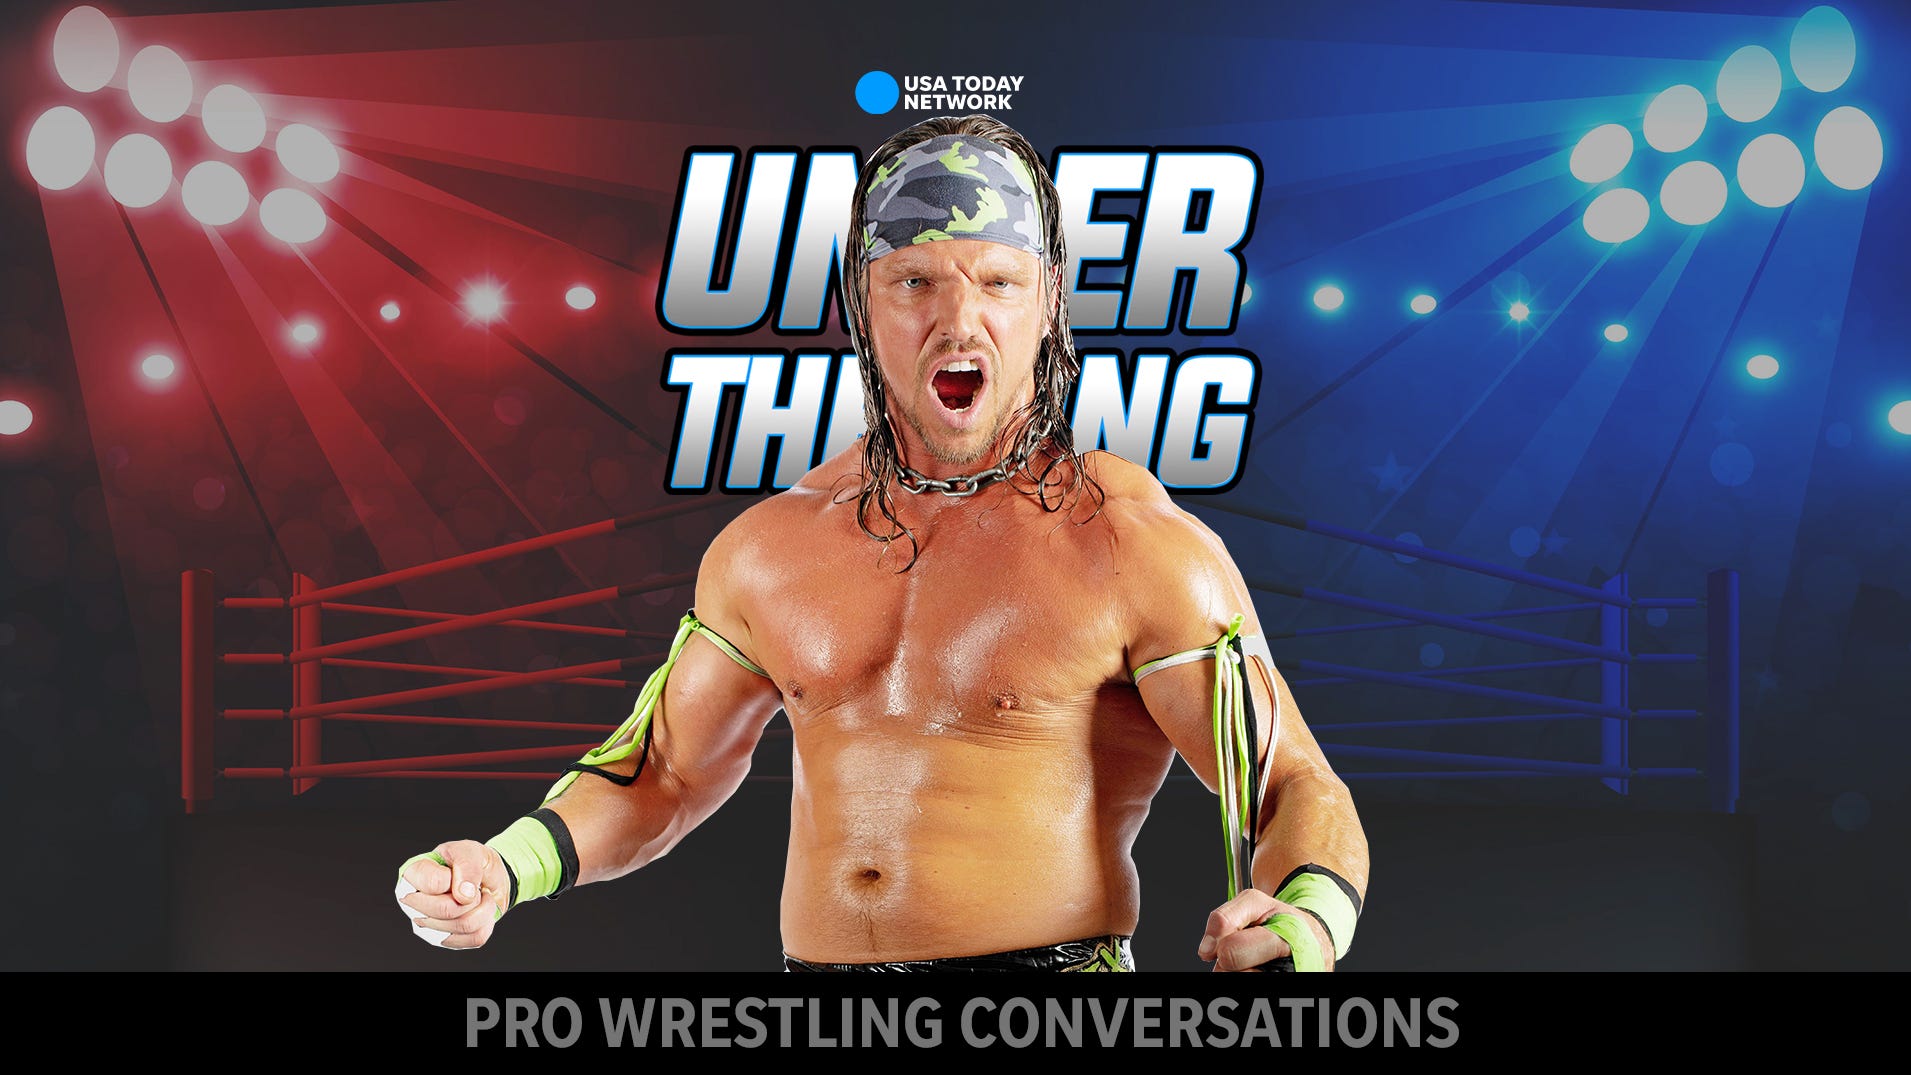 Under The Ring: Brian Anthony on his run in NEW, his big moments, marketing and branding